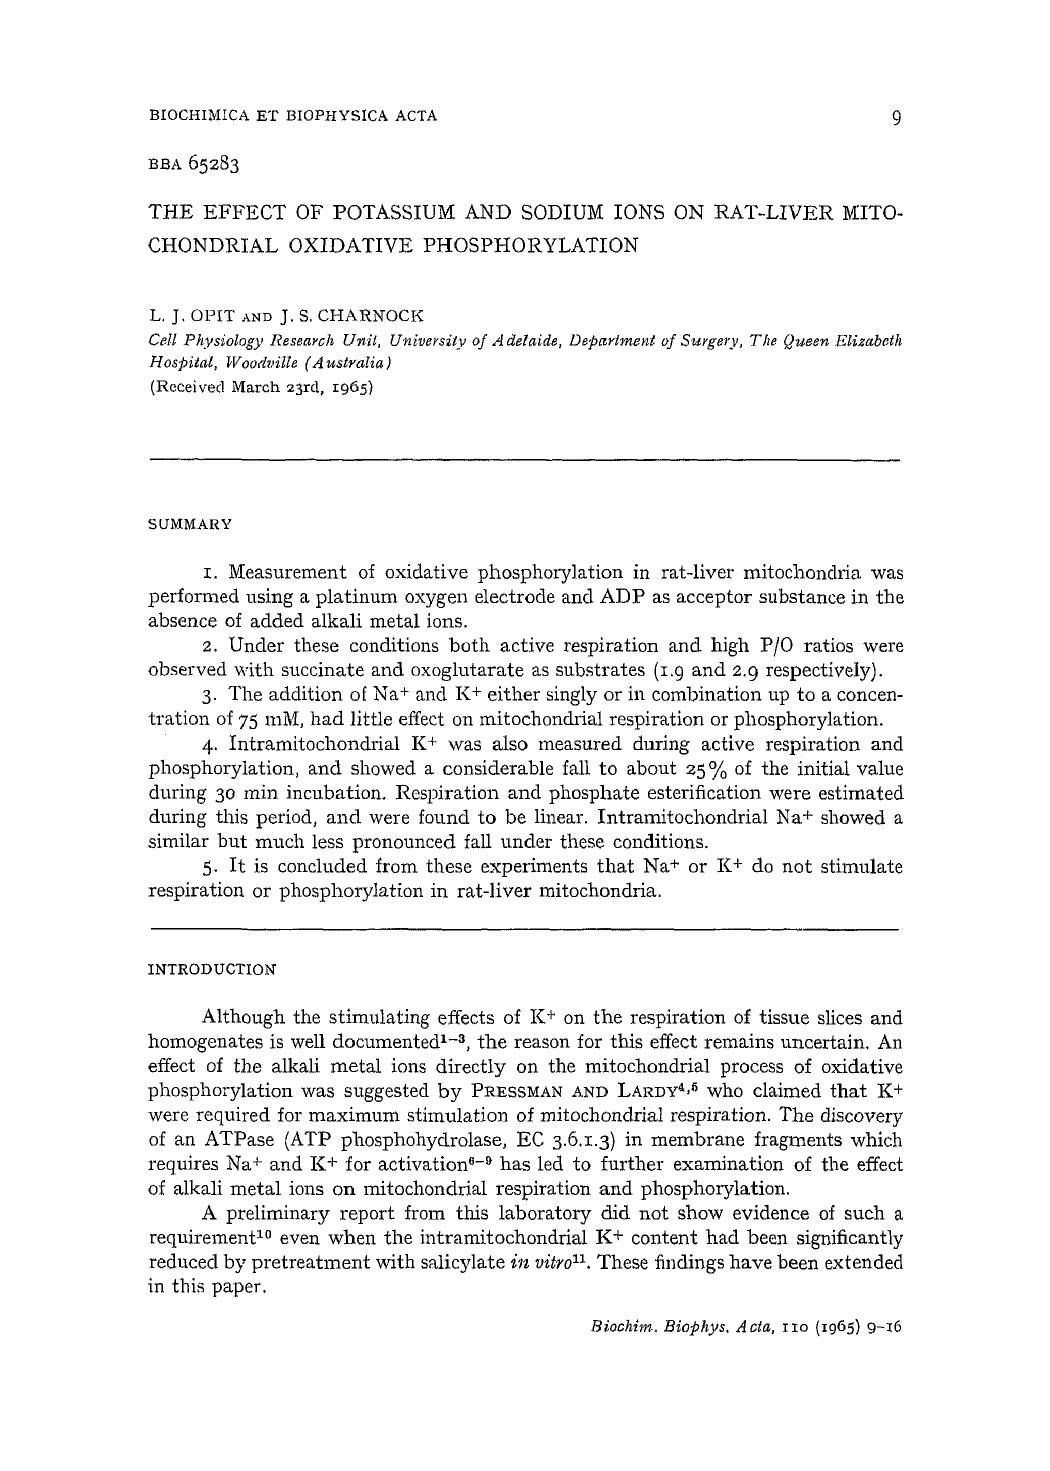 The effect of potassium and sodium ions on rat-liver mitochondrial oxidative phosphorylation by L.J. Opit; J.S. Charnock